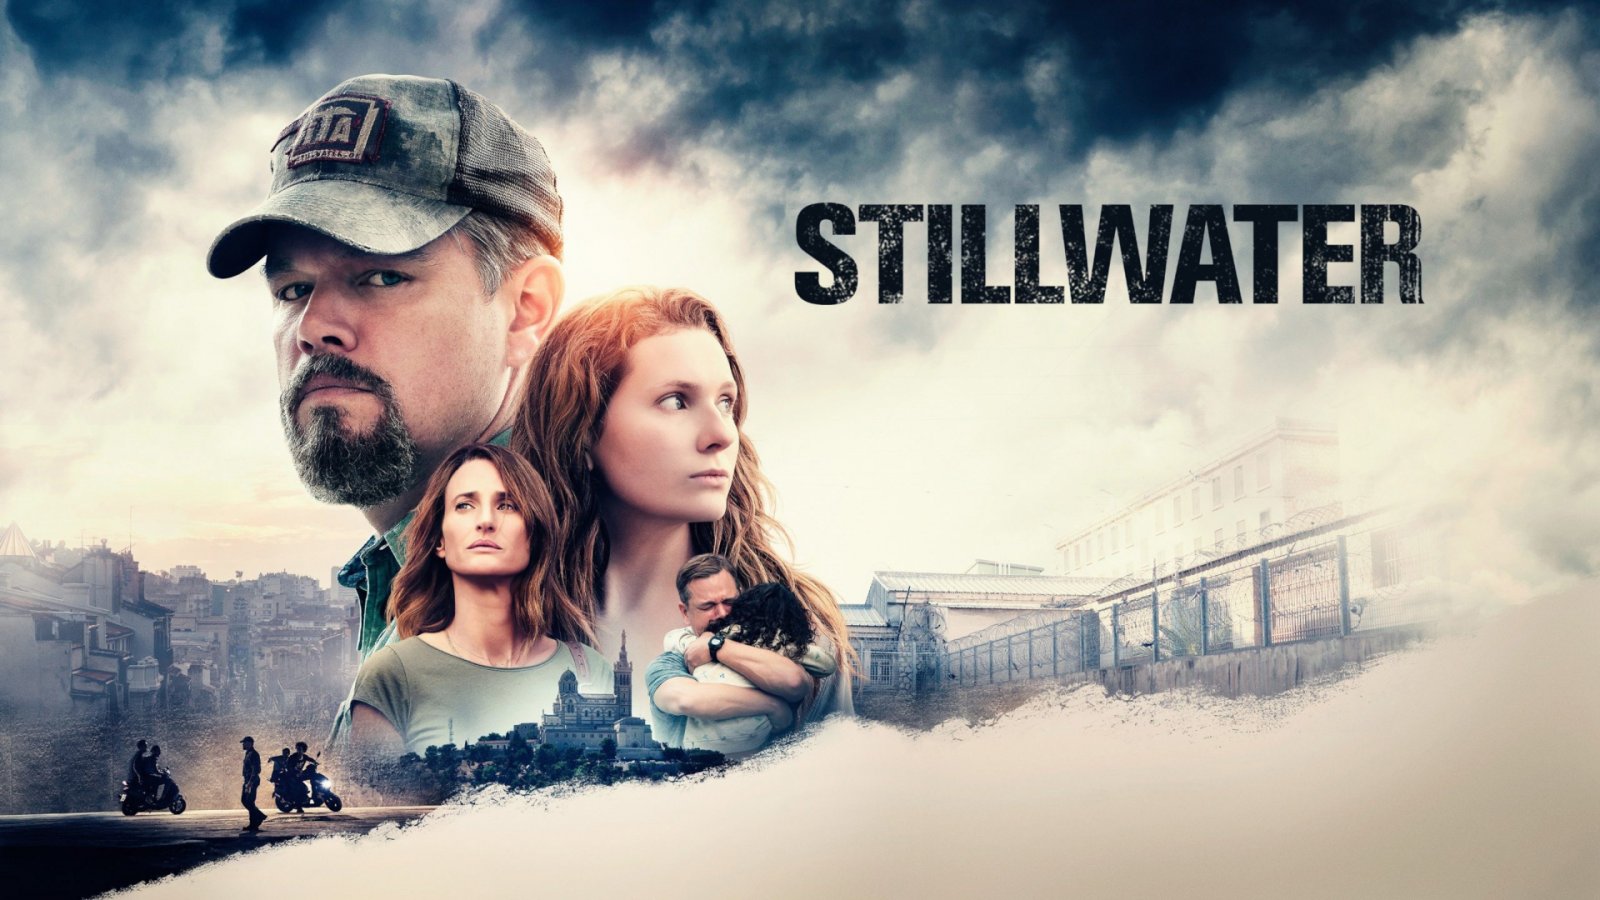 The Girl from Stillwater, streaming on Prime Video today